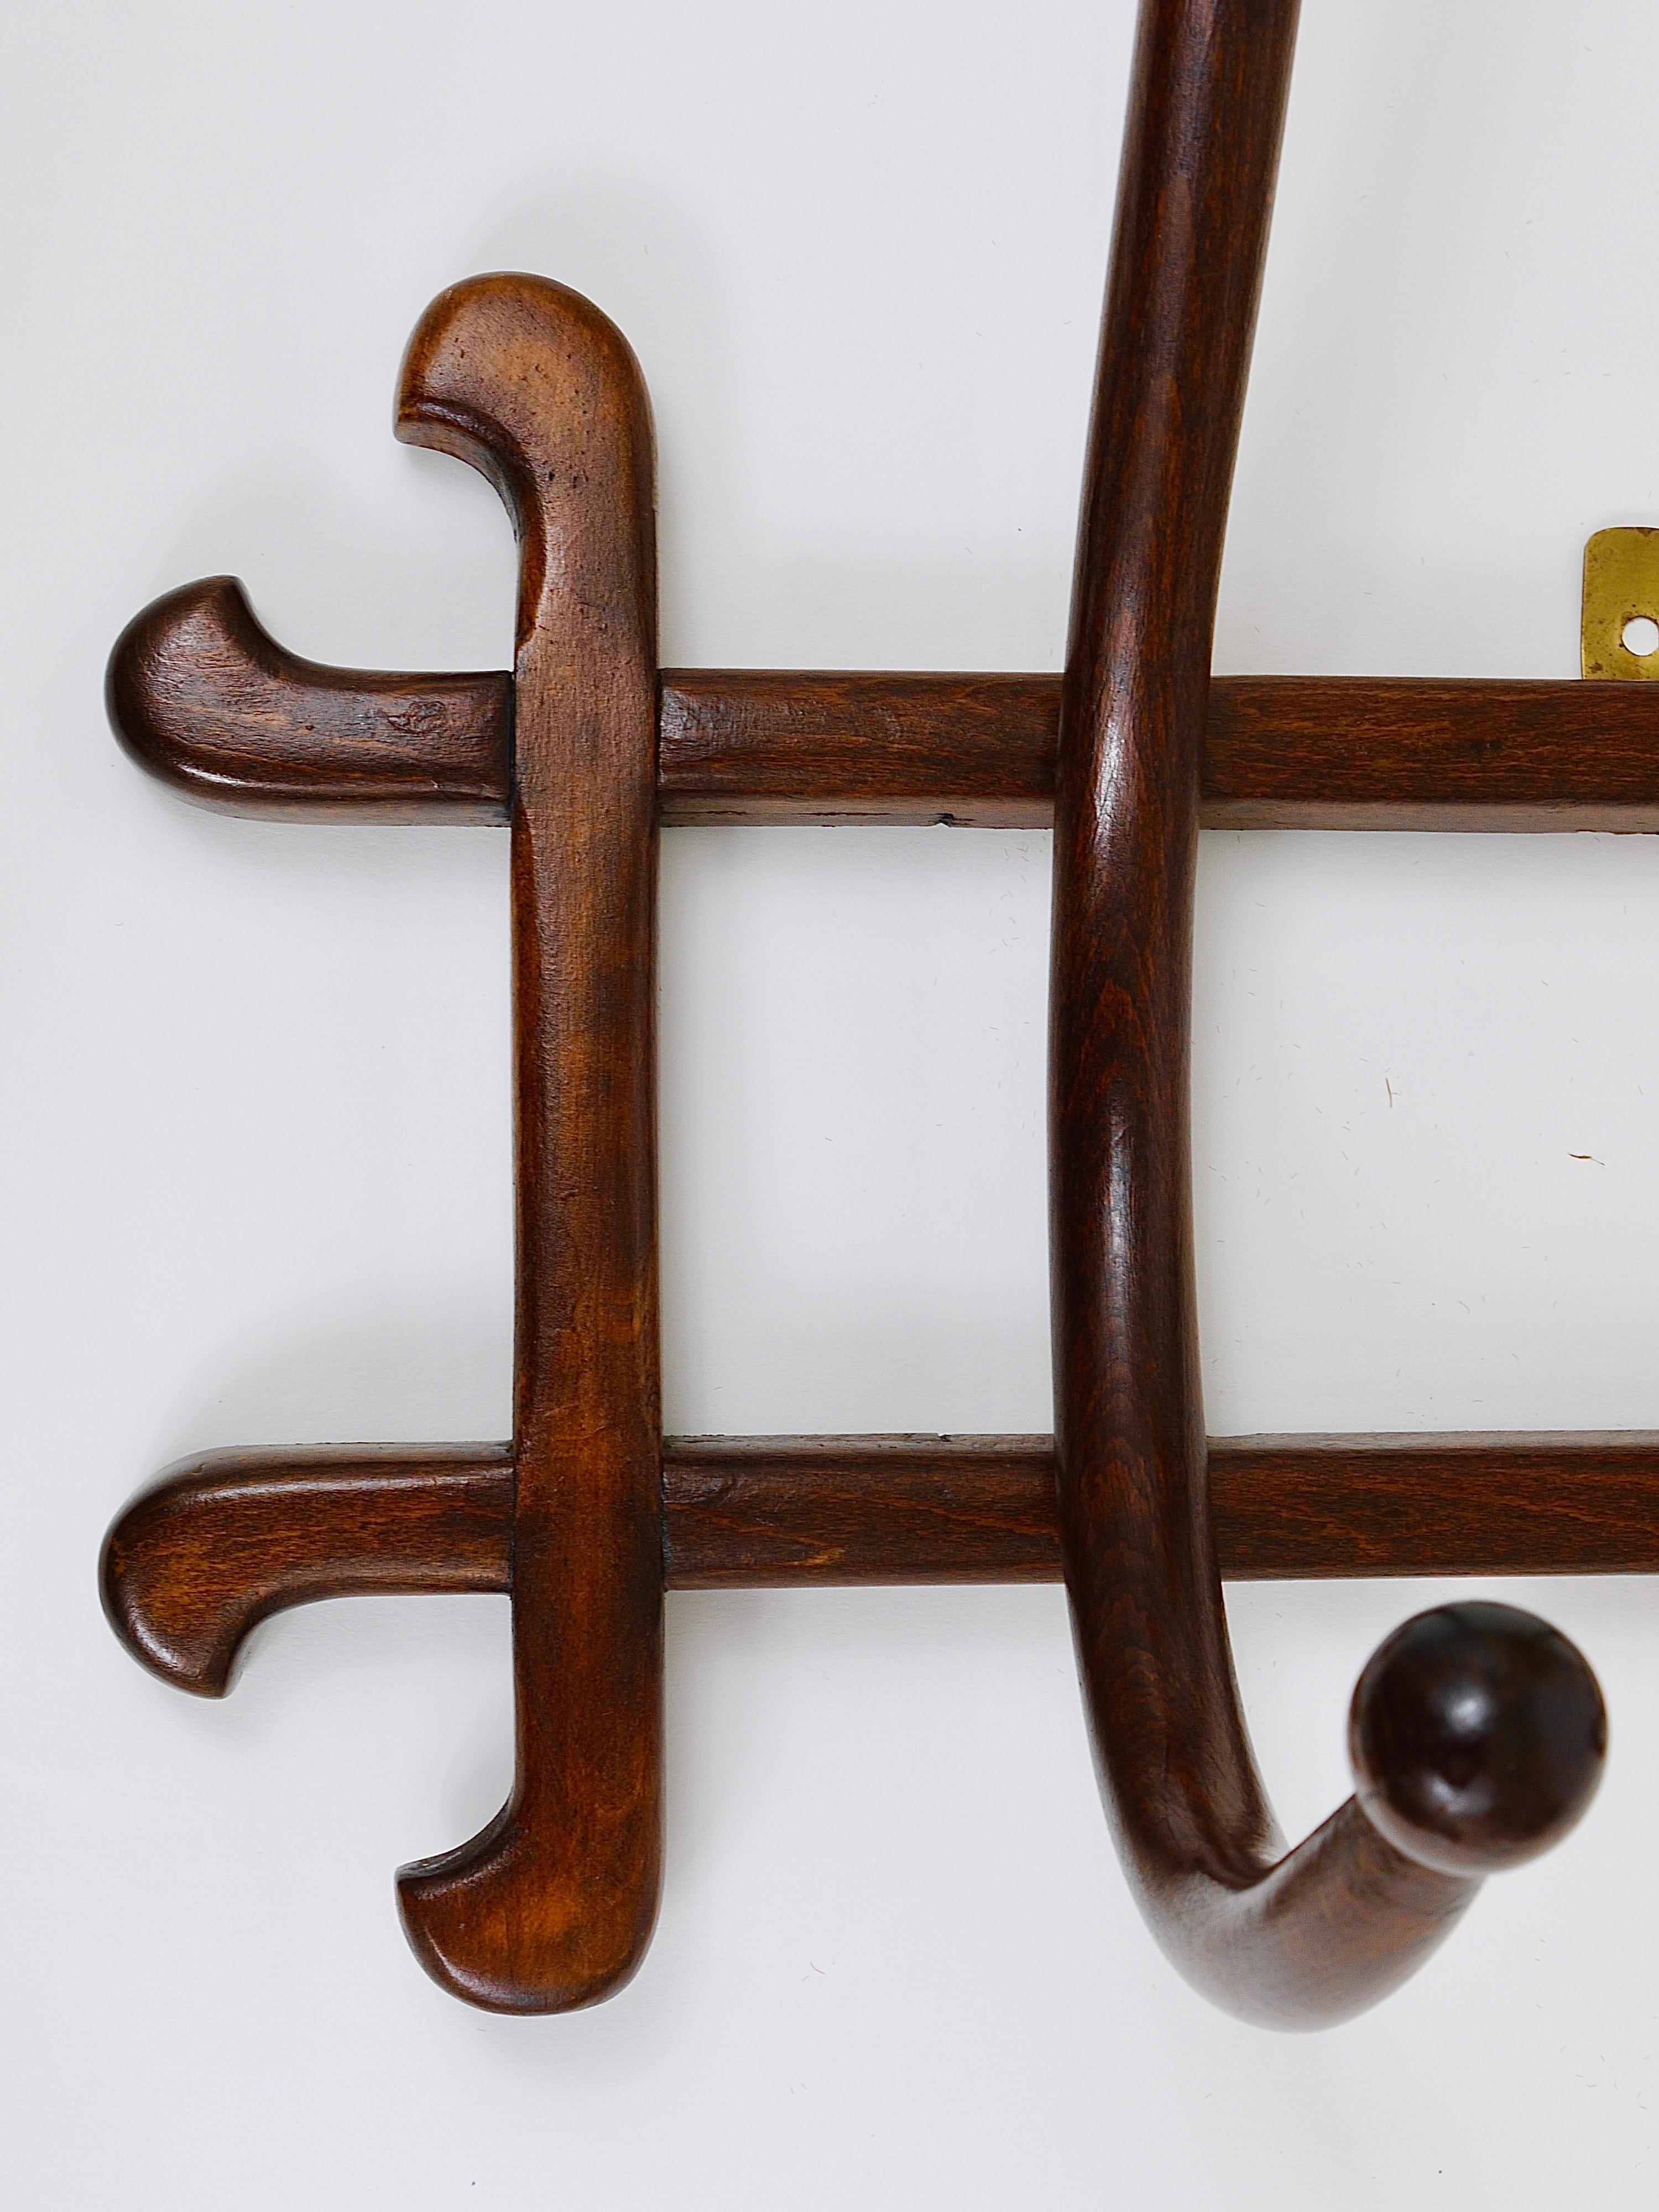 1900s Thonet Art Nouveau Secession Bentwood Wall Coat Rack with four Hangers 9